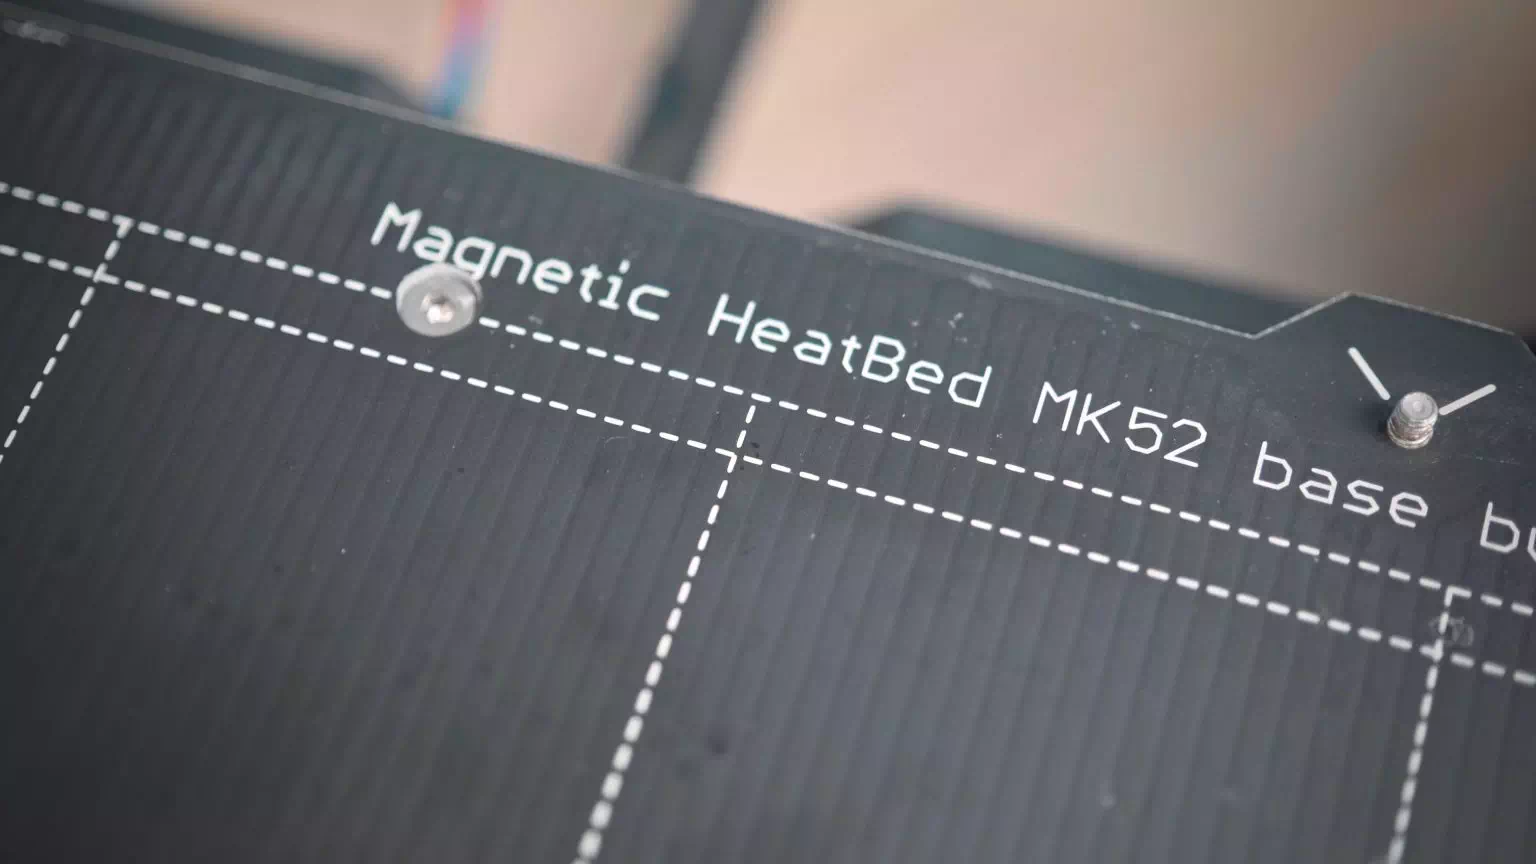 magnetic heatbed